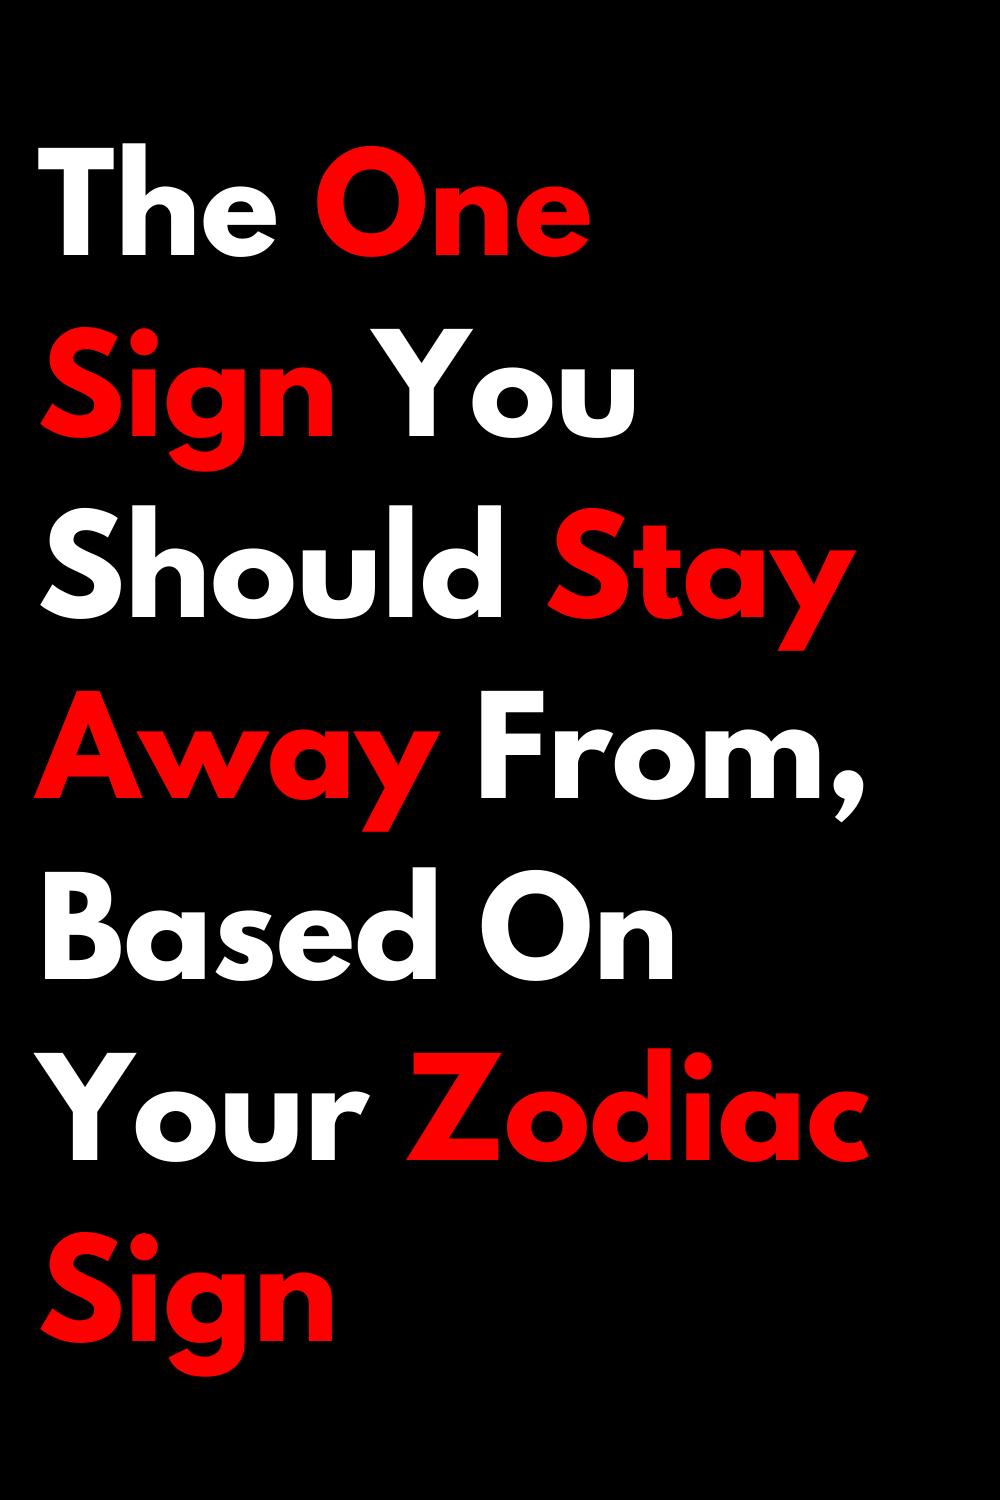 The One Sign You Should Stay Away From, Based On Your Zodiac Sign